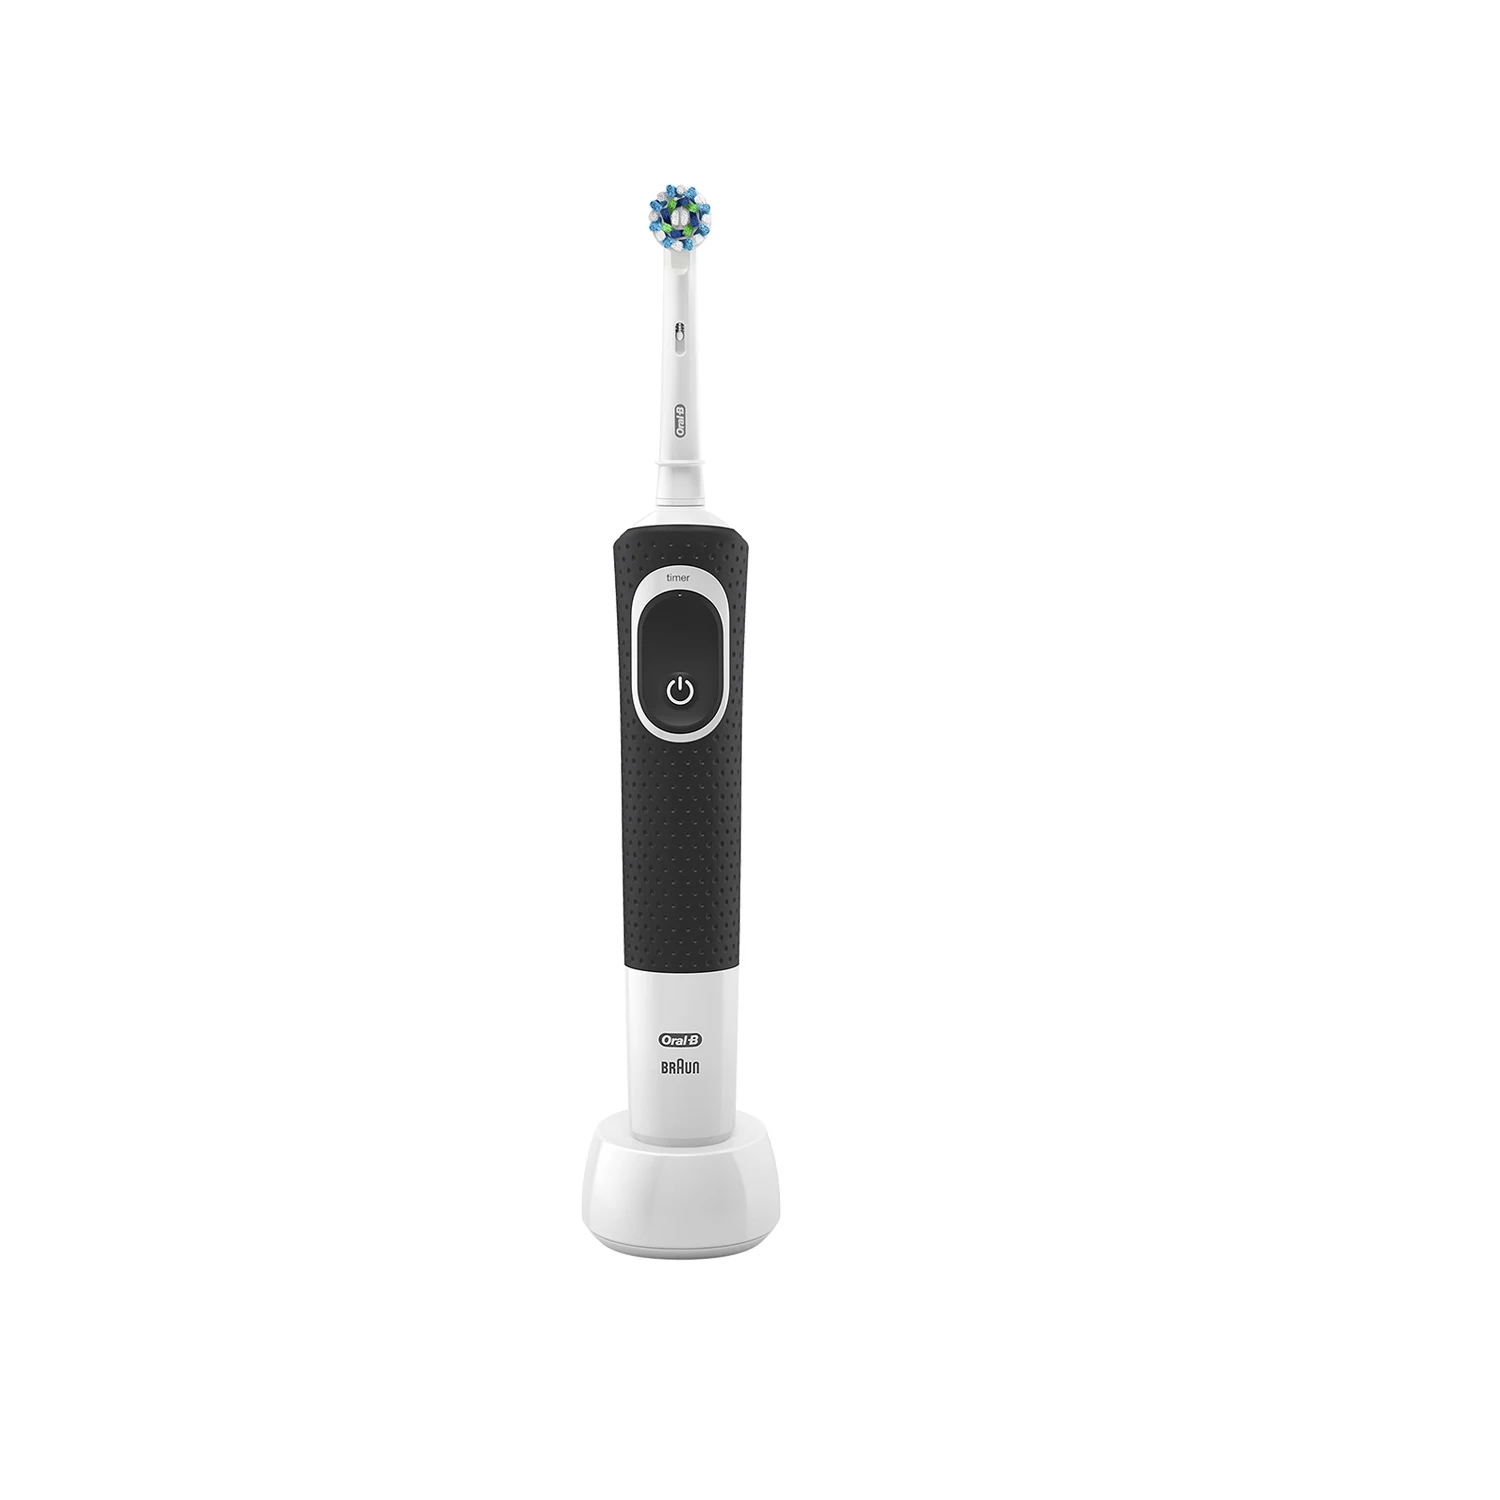 Oral-B vitality black cross action offers superior cleaning and plaque removal. Its brush head adapts to each individual tooth to clean away plaque and gently remove stains. Oral-B is a dentist recommended electric toothbrush brand worldwide.

    Daily Clean - The Oral-B Vitality Cross Action electric rechargeable toothbrush provides a clinically proven superior clean then a regular manual toothbrush.
    2D CLEANING : The professionally inspired design of the toothbrush head surrounds each tooth as 2D cleaning action oscillates and rotates to remove more plaque than a regular manual toothbrush.
    2 MINUTES TIMER : A helpful on-handle timer buzzes every 30 seconds to let you know when it�s time to focus on brushing the next quadrant of your mouth. The electric toothbrush also alerts when you have brushed for the dentist-recommended time of 2 minutes.
    COMPACTIBILITY : Oral-B offers a variety of replacement toothbrush heads to fit your personal oral health needs. The Oral-B Vitality electric toothbrush is compatible with a wide range of Oral-B electric toothbrush heads : Cross Action, 3D White, Sensi Ultrathin, Sensitive Clean, Precision Clean, Floss Action, Tri Zone, Dual Clean, Power Tip, Ortho Care.


Key Features : 

    The essential toothbrush to achieve an everyday clean.
    Oscillates and rotates to remove plaque.
    Superior 2D Cleaning Action.
    Built-in 2-minute quadrant timer.
    7600 rotations every minute gives effective brushing

Product Specifications : 

    Product Dimension : 30 x 20 x 15 cm
    Product Weight : 109 g
    Brand : ORAL-B
    Batteries : 1 AA batteries required. 
    Toothbrush type : Rotating-oscillating toothbrush
    Integrated timer : Yes
    Power source: Battery
    Battery type: Built-in
    Rechargeable: Yes
    Product colour : Black 

Box Content : 

    1 x toothbrush handle with 2-pin charger
    1 x toothbrush head

Preparation and Usage :
How To Use Your electric toothbrush? Wet the brush head and apply toothpaste. Place the toothbrush in the mouth and turn on. Guide the brush head slowly from tooth to tooth. Hold the toothbrush head in place for a few seconds before moving on to the next tooth. Brush the gums as well as the teeth, first the outsides, then the insides, finally the chewing surfaces.

Safety Warning:
Periodically check the cord for damage. If the cord is damaged, take the charging unit to an Oral-B Braun Service Centre. A damaged or non-functioning unit must no longer be used. Not intended for use by children under age of 3 years. This appliance is not intended for use by children or persons with reduced physical, sensory or mental capabilities, unless they are supervised by a person responsible for their safety. In general, we recommend that you keep the appliance out of the reach of children. Children should be supervised to ensure they do not play with the appliance. If the product is dropped, the brush head should be replaced before the next use, even if no damage is visible. Do not place or store the charger where it can fall or be pulled into a tub or sink. Do not place the charger in water or other liquid. Do not reach for a charger that has fallen into water. Unplug immediately. Do not modify or repair the product. This may cause fire, electric shock or injury. Consult your dealer for repairs or contact an Oral-B Service Centre. Do not disassemble the product except when disposing of the battery. When taking out the battery for disposal, use caution not to short the positive (+) and negative (-) terminals. Do not insert any object into any opening of the appliance / charging unit. Do not touch the power plug with wet hands. This can cause electric shock. When unplugging, always hold the power plug instead of the cord. Use this product only for its intended use as described. Do not use attachments which are not recommended by the manufacturer. If you are undergoing treatment for any oral care condition, consult your dental professional prior to use.

Oral-B Vitality white and clean electric rechargeable toothbrush powered by Braun
Discover the next level of oral care, brought to you by Oral-B, a worldwide leader in toothbrushes *. Each Oral-B electric toothbrush provides a clean vs. a regular manual toothbrush. Find your ideal electric toothbrush from Oral-B - the #1 dentist used and recommended brand, worldwide. *

* Based on surveys of a representative worldwide sample of dentists carried out for P&G regularly


Oral-B Vitality White and Clean Electric Rechargeable Toothbrush
The Oral-B Vitality electric toothbrush provides a clinically proven clean vs. a regular manual toothbrush. The round shape of the White + Clean toothbrush head is designed to clean tooth by tooth, and 2D cleaning action oscillates and rotates for better plaque removal than a regular manual toothbrush. An in-handle timer helps you brush for a dentist-recommended 2 minutes.

The professionally inspired design of the toothbrush head surrounds each tooth as 2D cleaning action oscillates and rotates to remove more plaque than a regular manual toothbrush.

A helpful on-handle timer buzzes every 30 seconds to let you know when it�s time to focus on brushing the next quadrant of your mouth. The electric toothbrush also alerts when you have brushed for the dentist-recommended time of 2 minutes.

Daily Clean - comprehensive everyday cleaning.
	
Oral-B offers a variety of replacement toothbrush heads to fit your personal oral health needs. The Oral-B Vitality electric toothbrush is compatible with a wide range of Oral-B electric toothbrush heads so you can get the clean you need, every time. Remember to change your toothbrush head as dentists recommend, every three or four months or when bristles are faded and worn to maintain a high level of cleanliness.
Oral-B Vitality white and clean electric rechargeable toothbrush powered by Braun

The Oral-B Vitality electric toothbrush features 2D cleaning action that cleans in two ways - oscillates and rotates - to remove more plaque than a regular manual toothbrush. However, when you upgrade to other electric toothbrushes, you can experience the cleaning power of 3D cleaning action that oscillates, rotates and pulsates for up to 100 percent more plaque removal.s. a regular manual toothbrush.